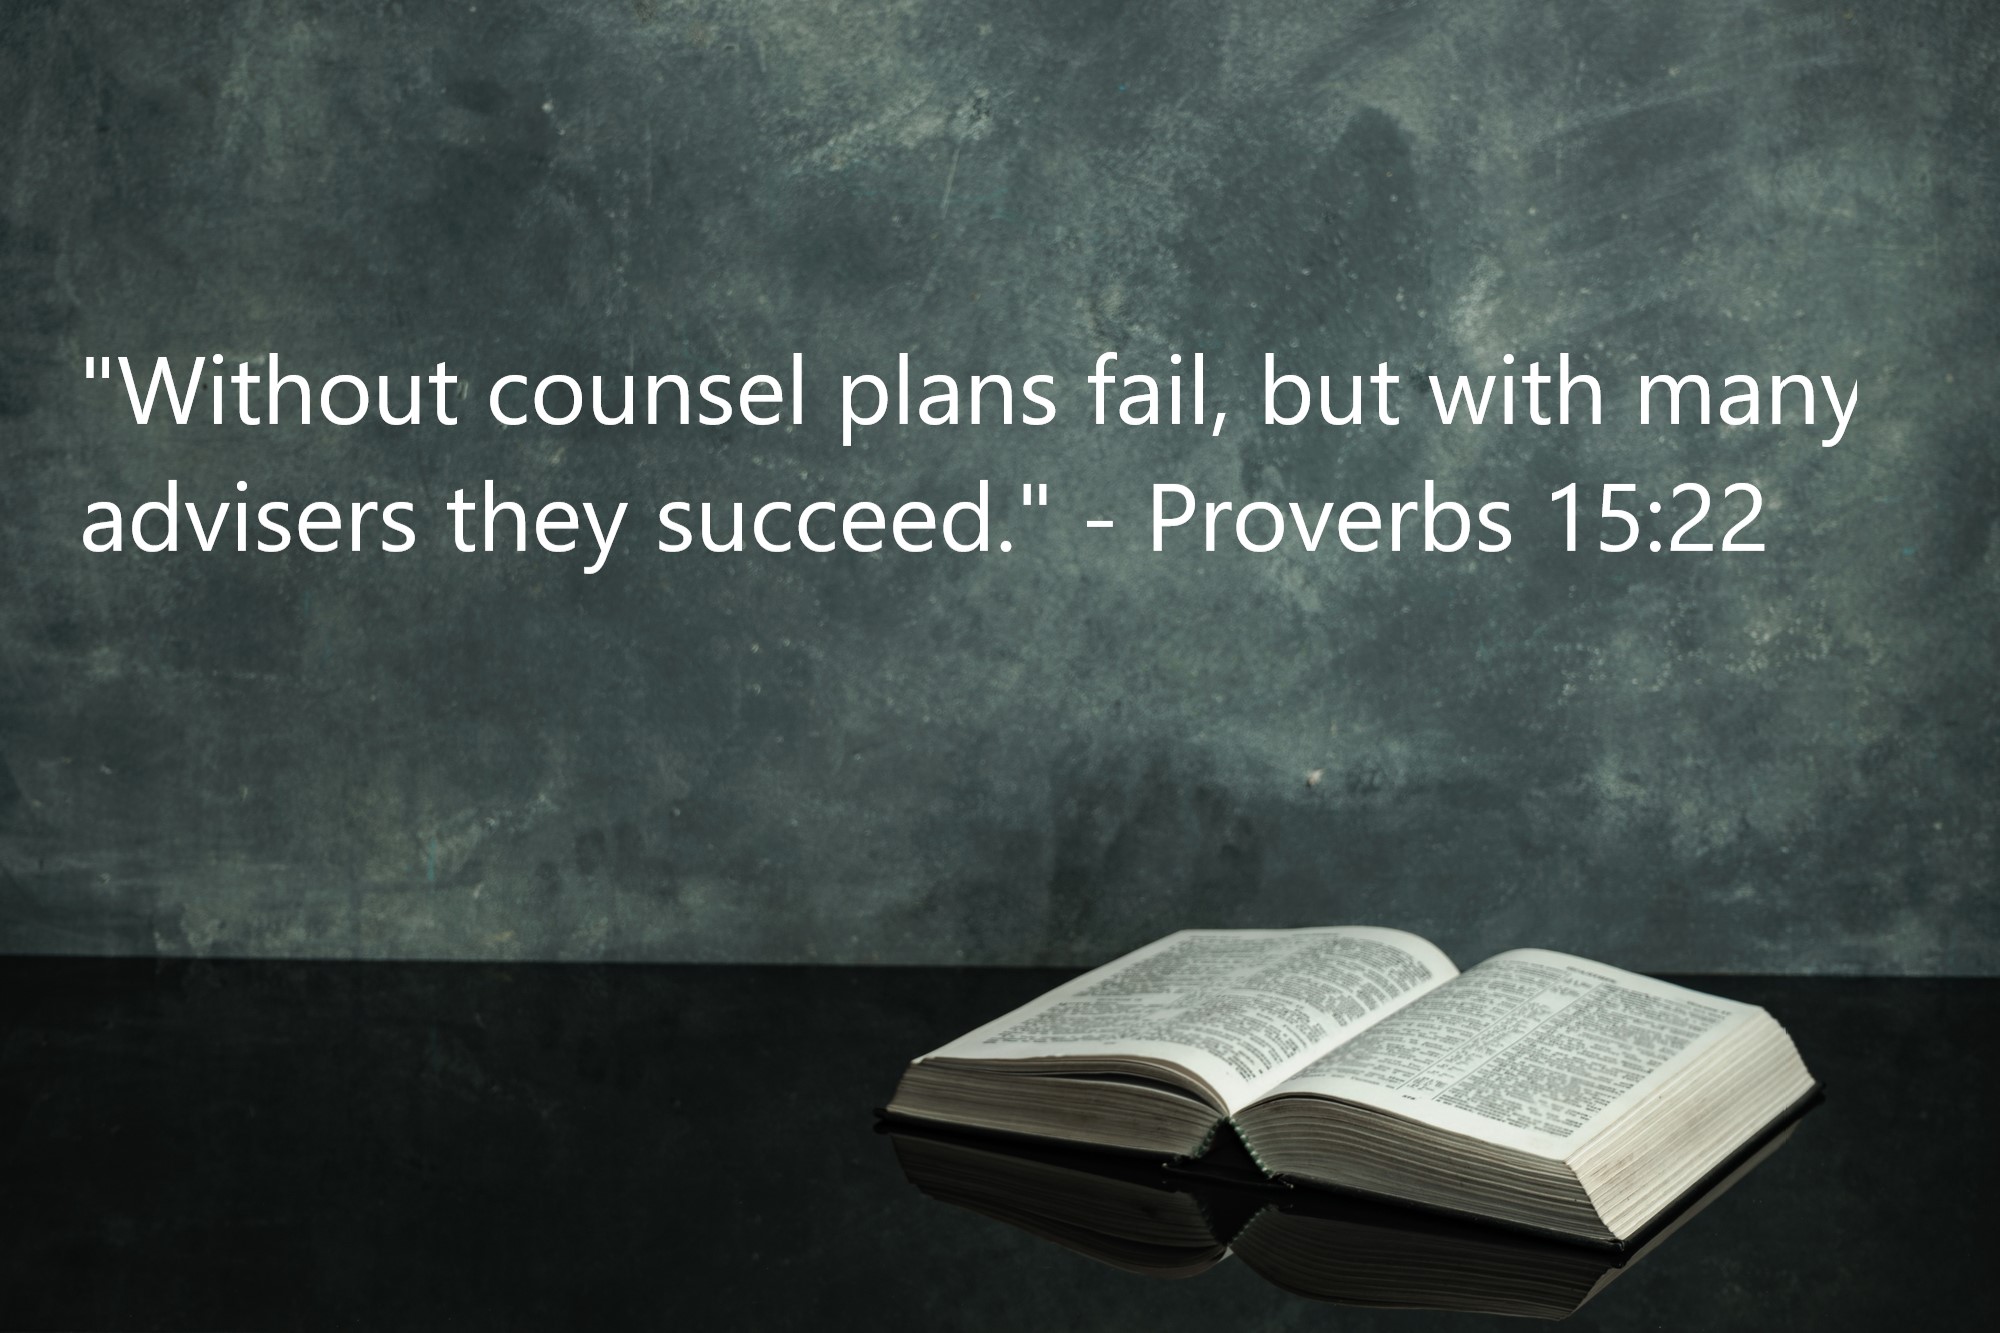 "Without counsel plans fail, but with many advisers they succeed." - Proverbs 15:22